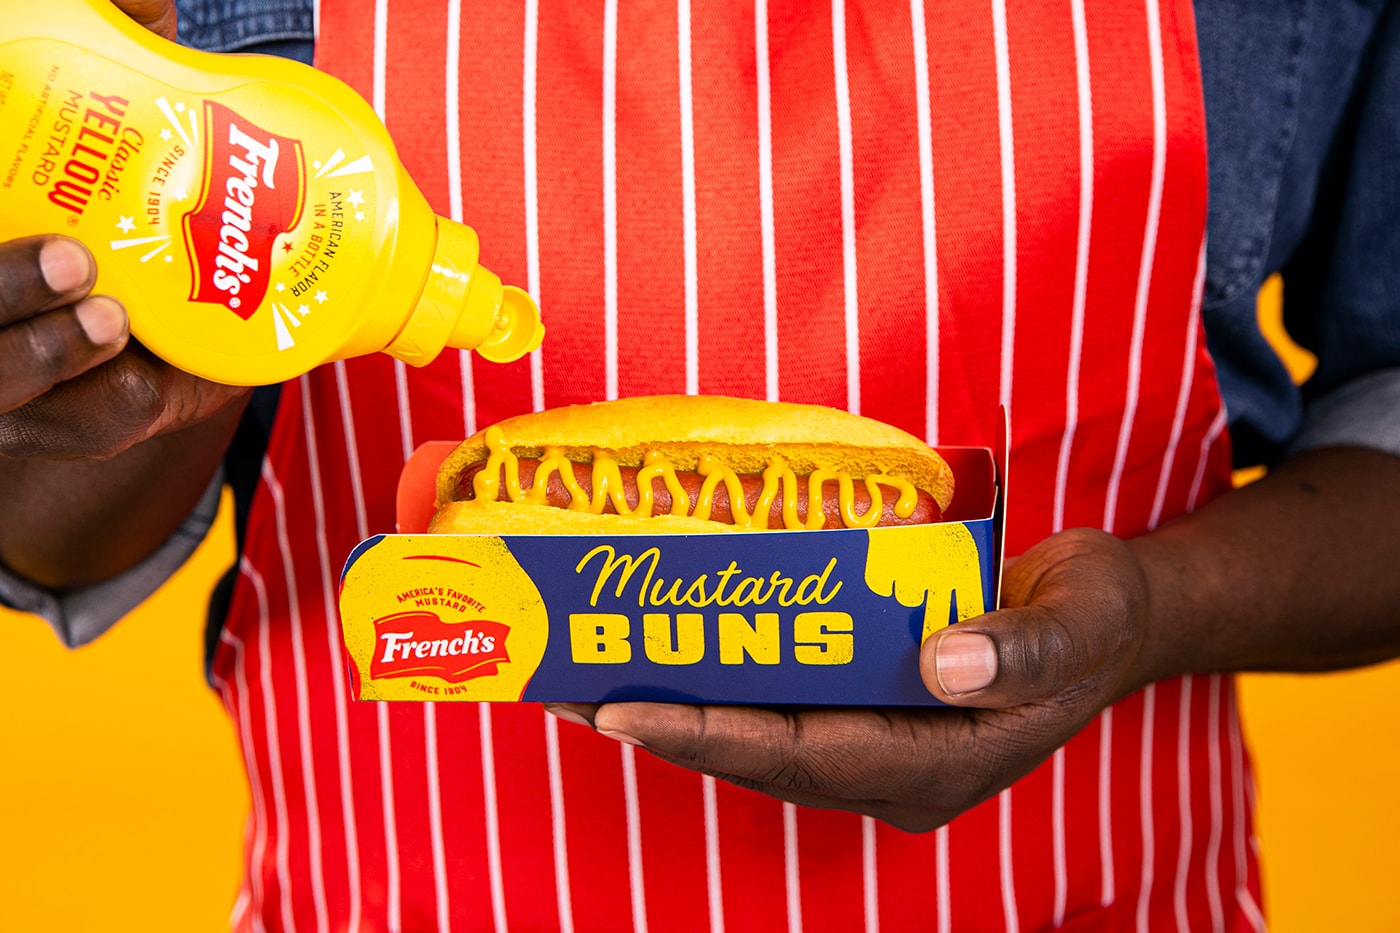 French's Limited Edition Mustard Buns Release info National Mustard Day August 7